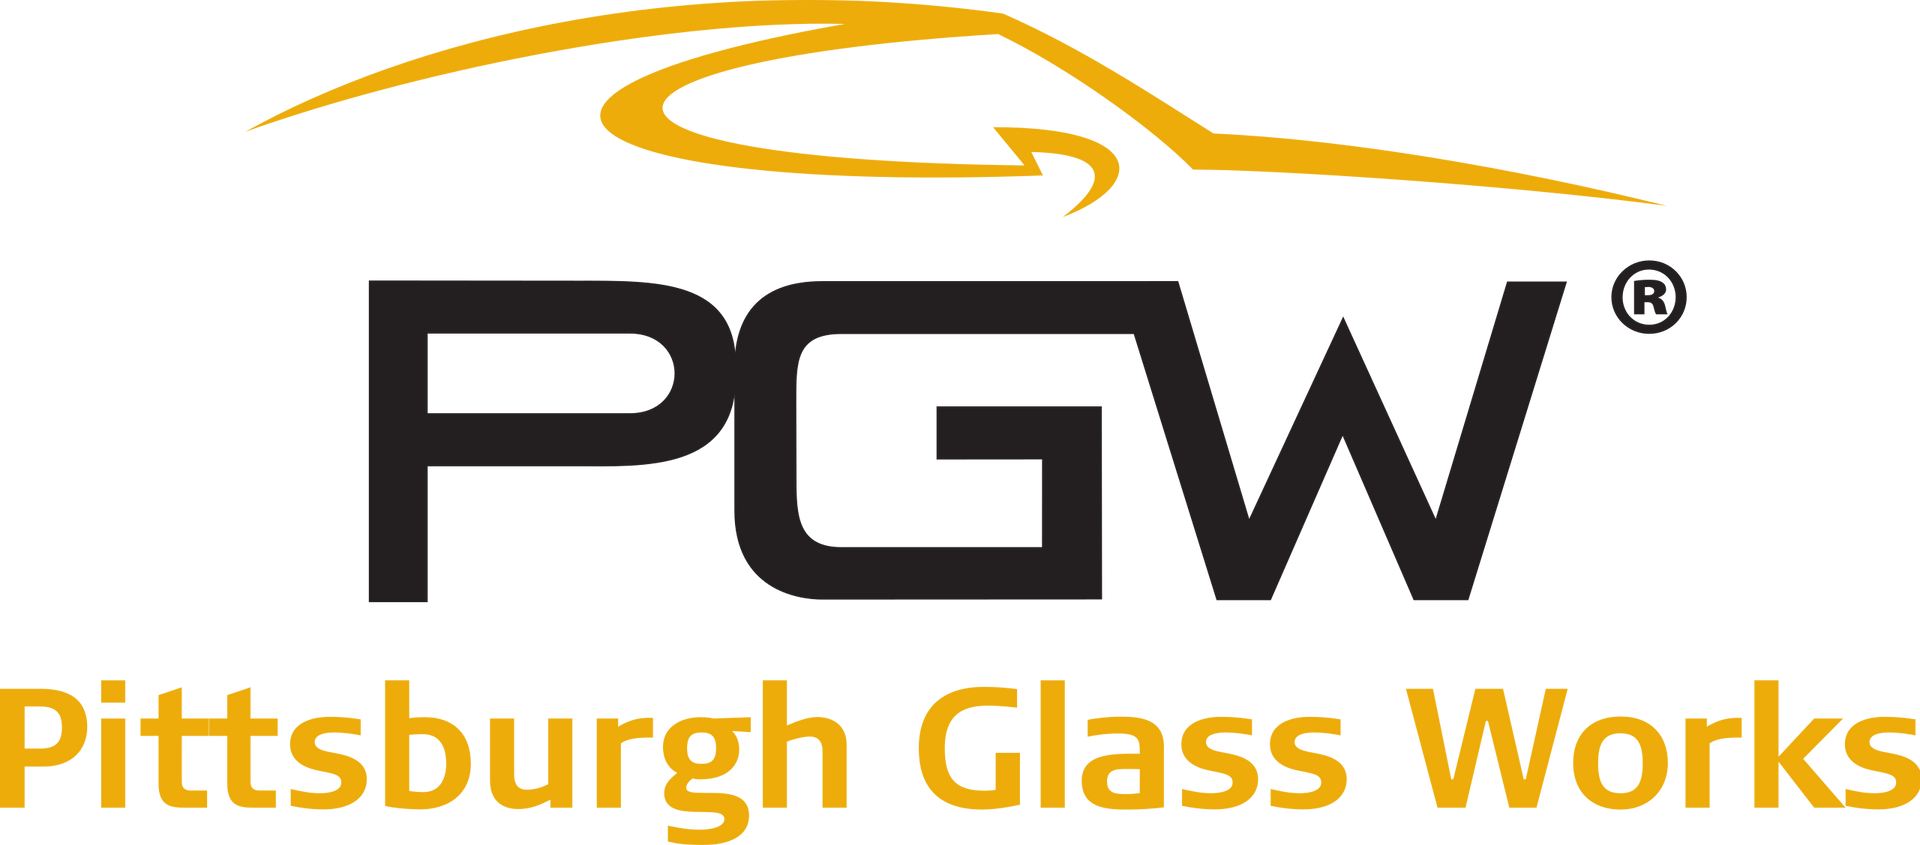 A logo for pittsburgh glass works with a car on it